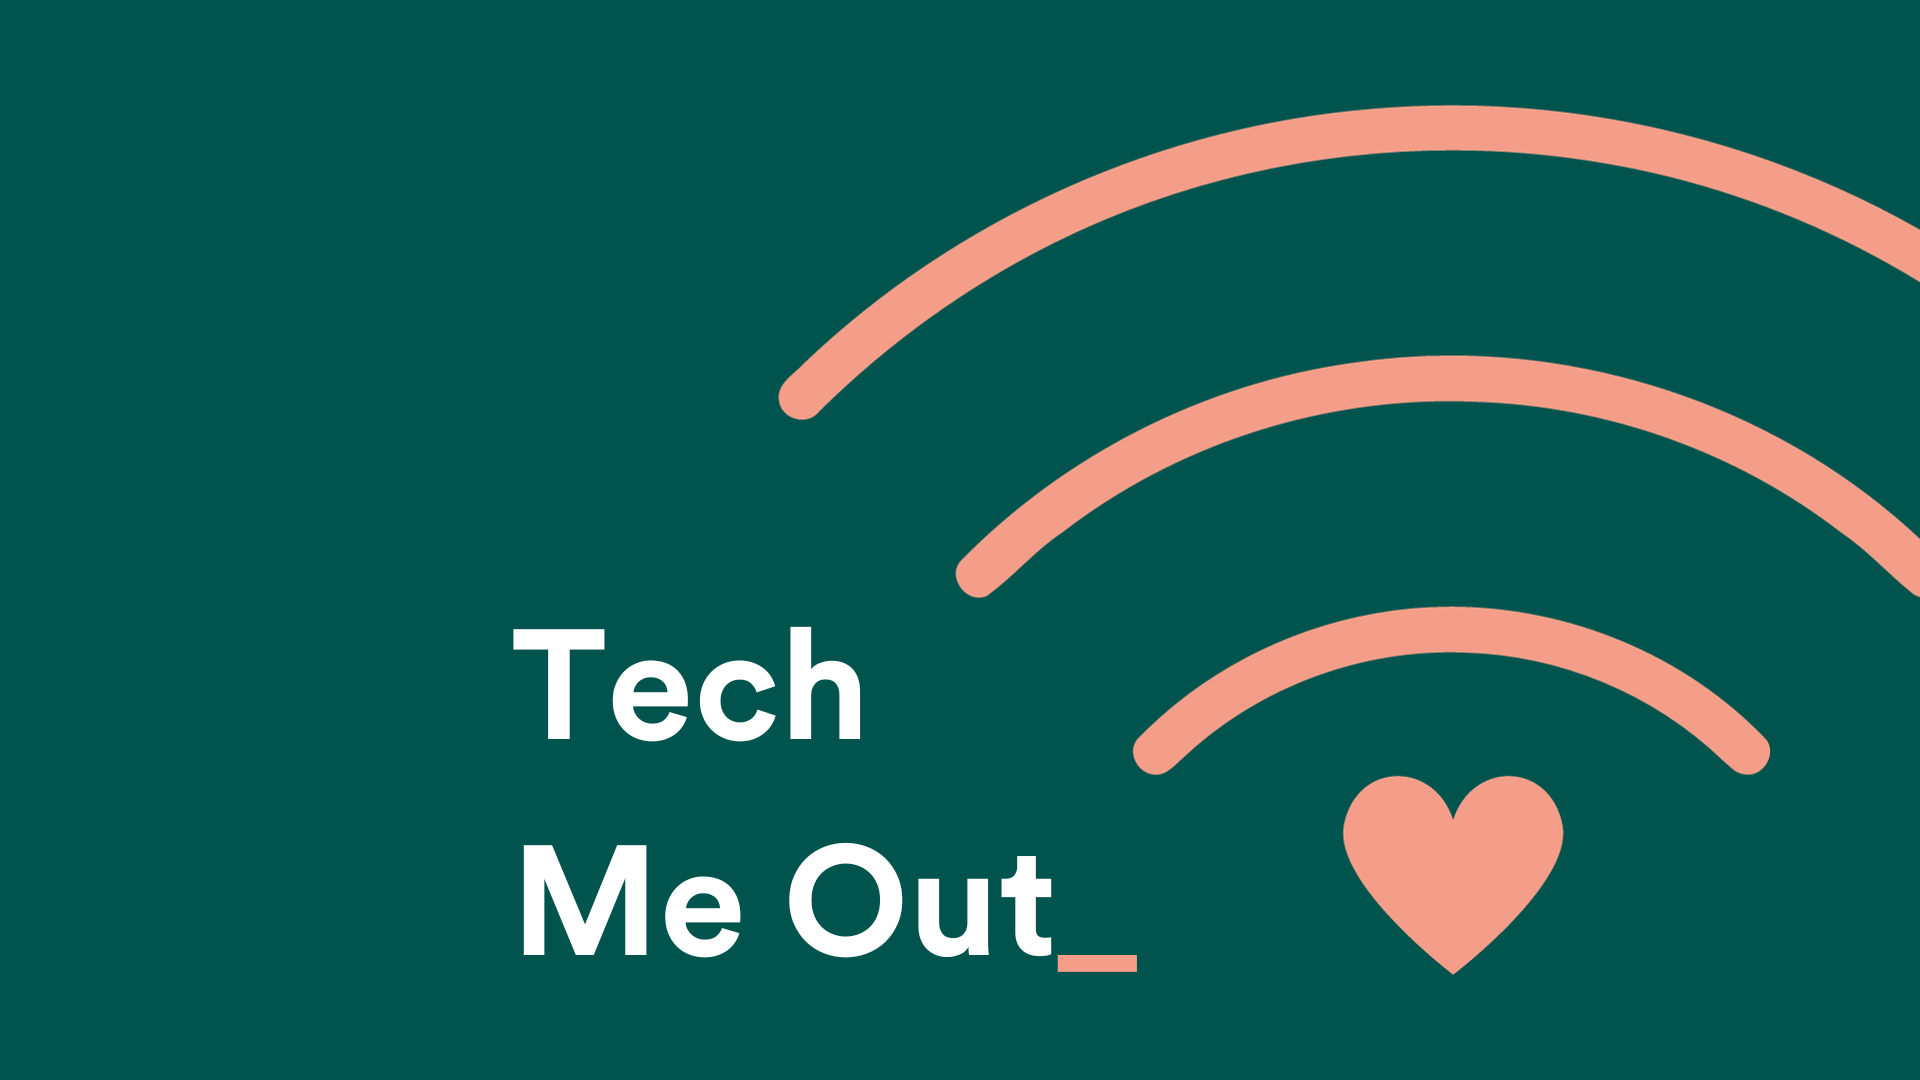 Tech me out: The beginners guide to RegTech